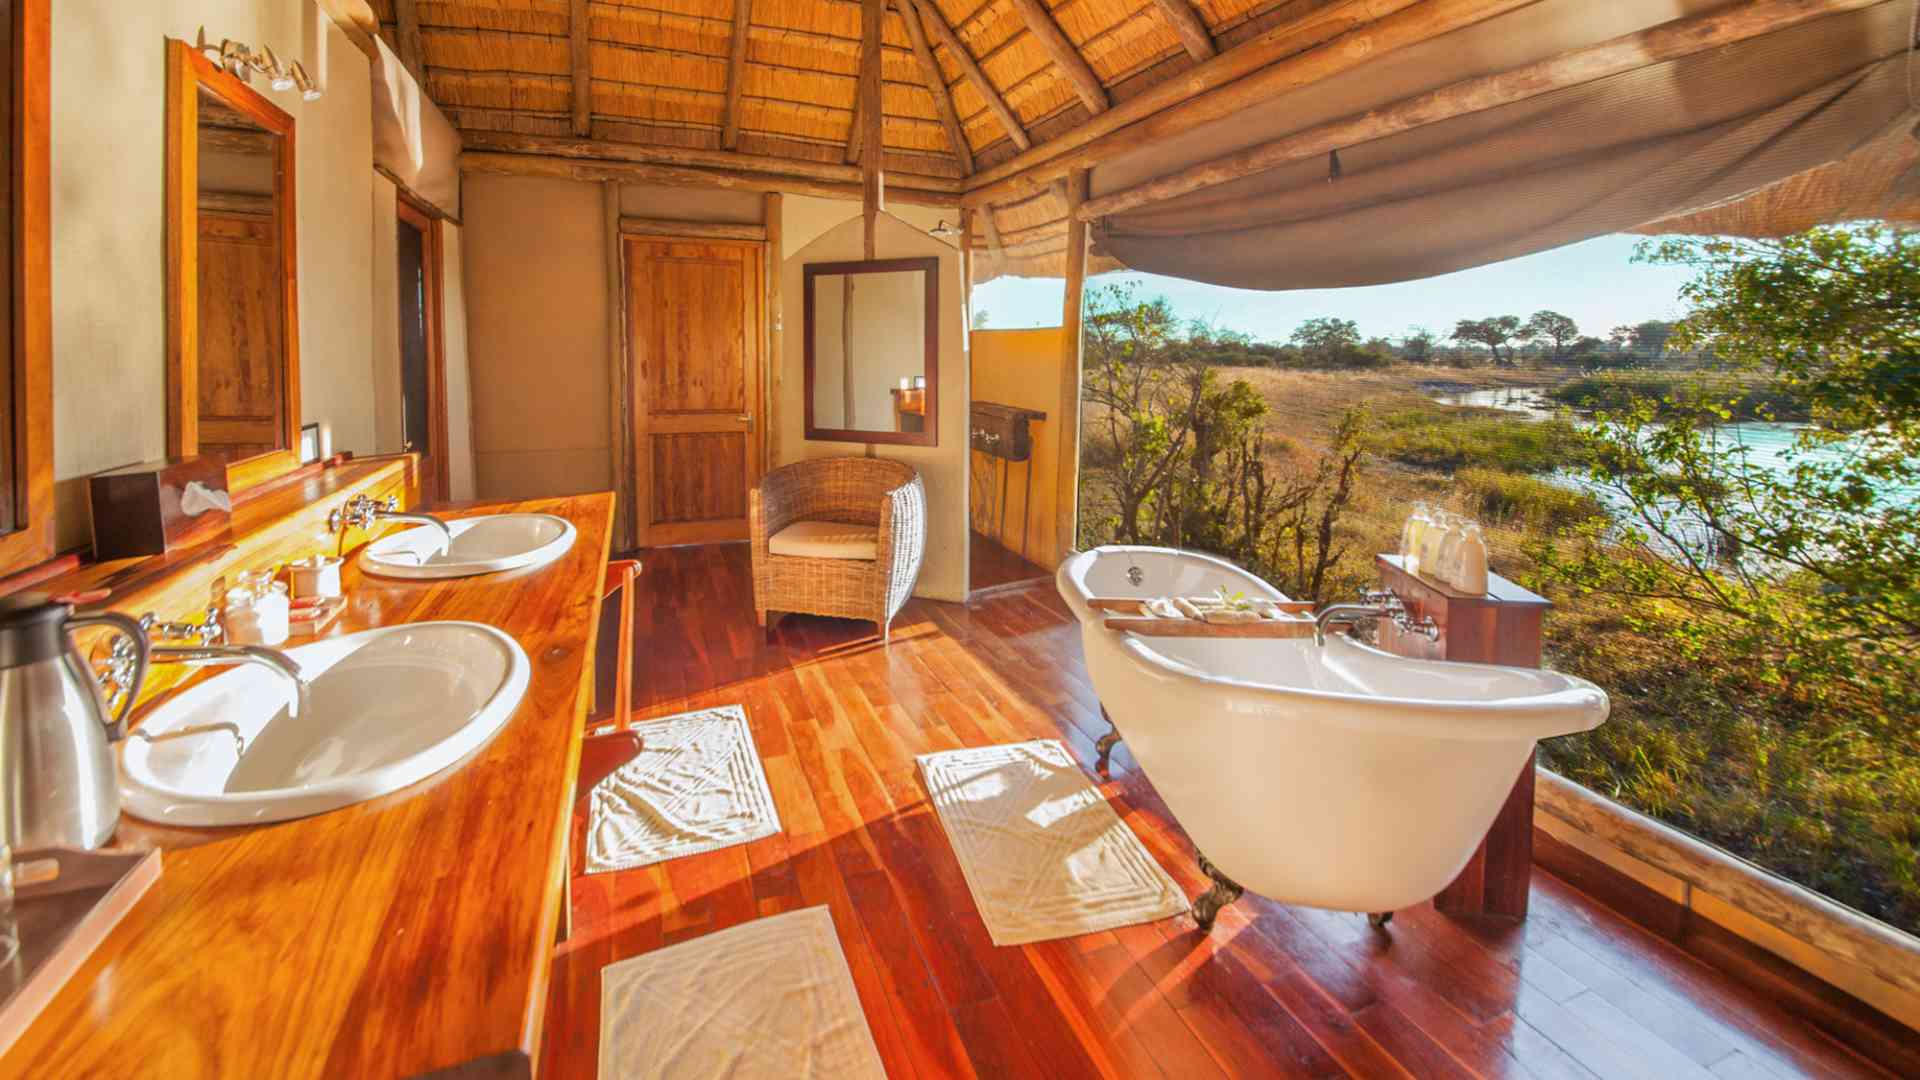 Bathing with a view at Lagoon Camp